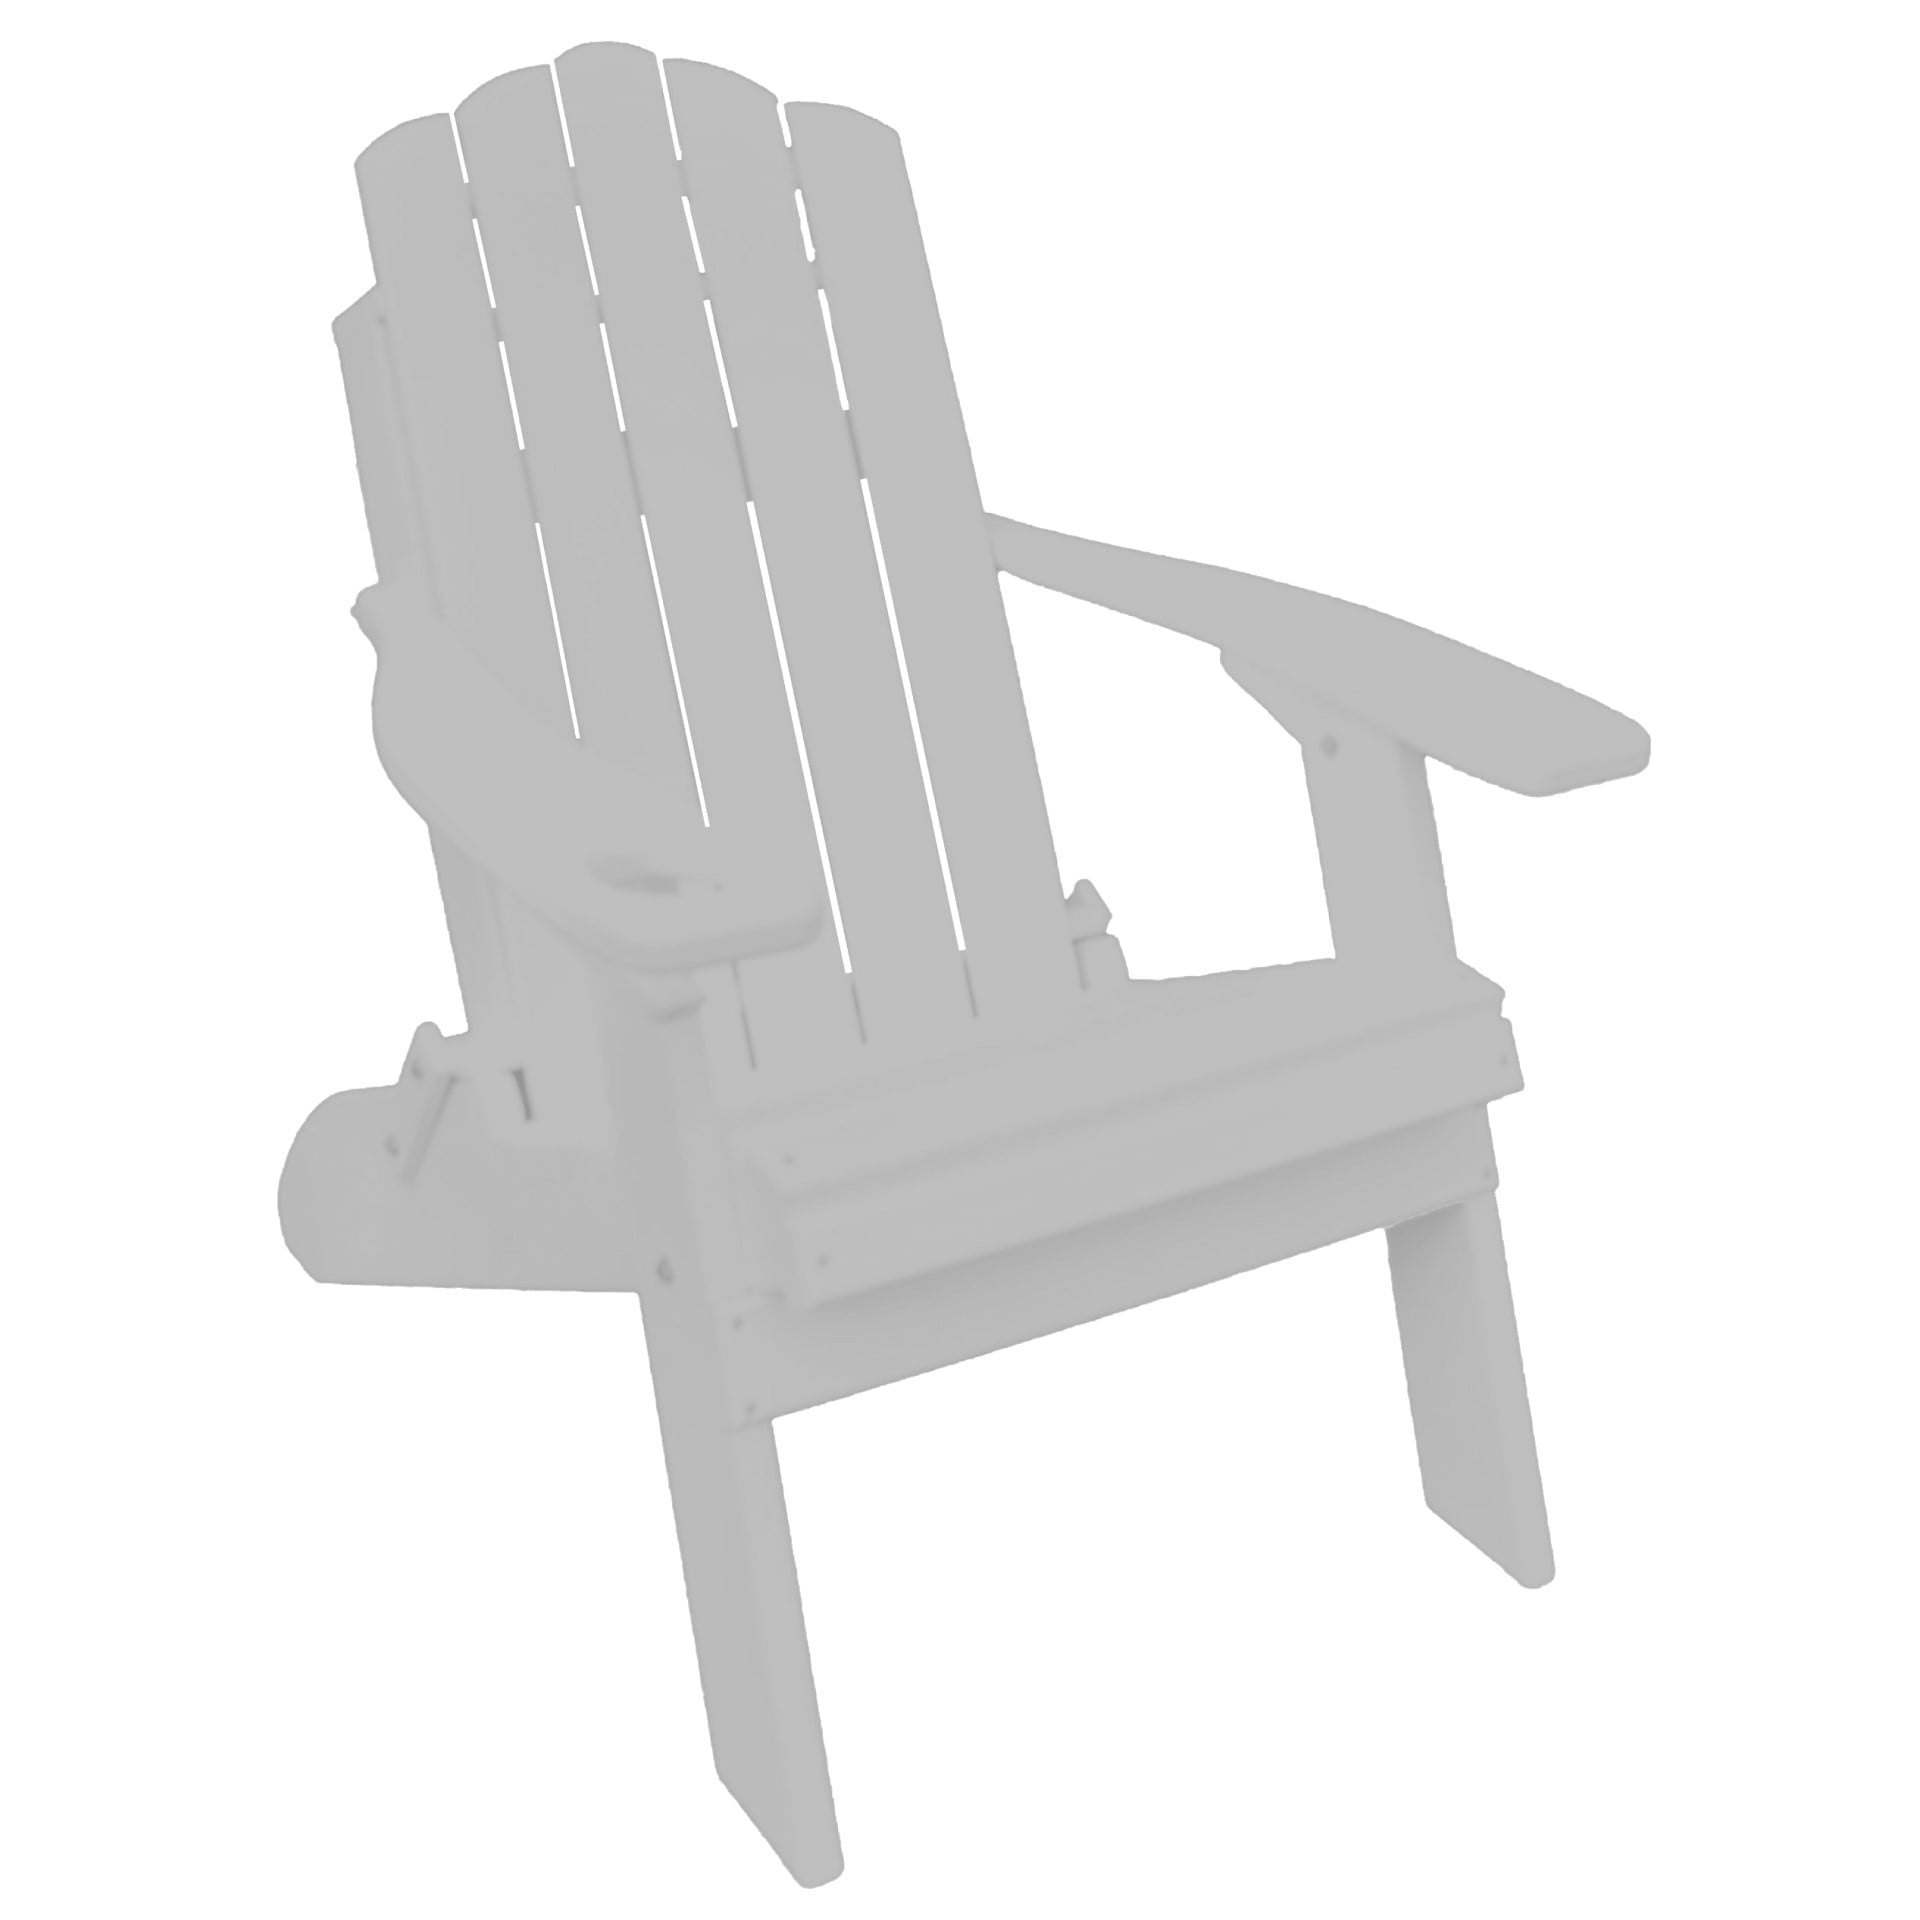 Country Folding Adirondack Chair with Cup Holder